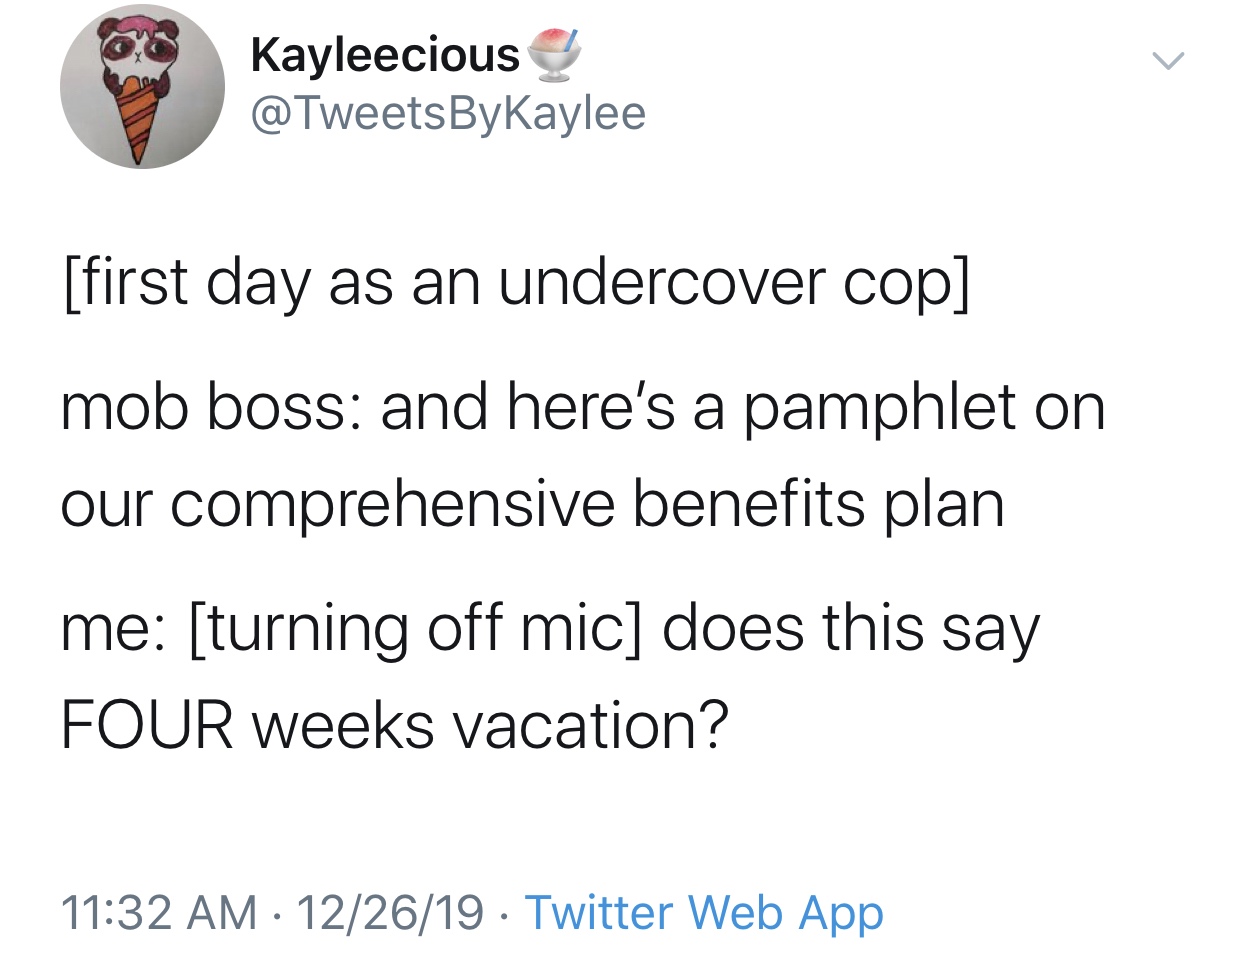 document - Kayleecious first day as an undercover cop mob boss and here's a pamphlet on our comprehensive benefits plan me turning off mic does this say Four weeks vacation? 122619 Twitter Web App